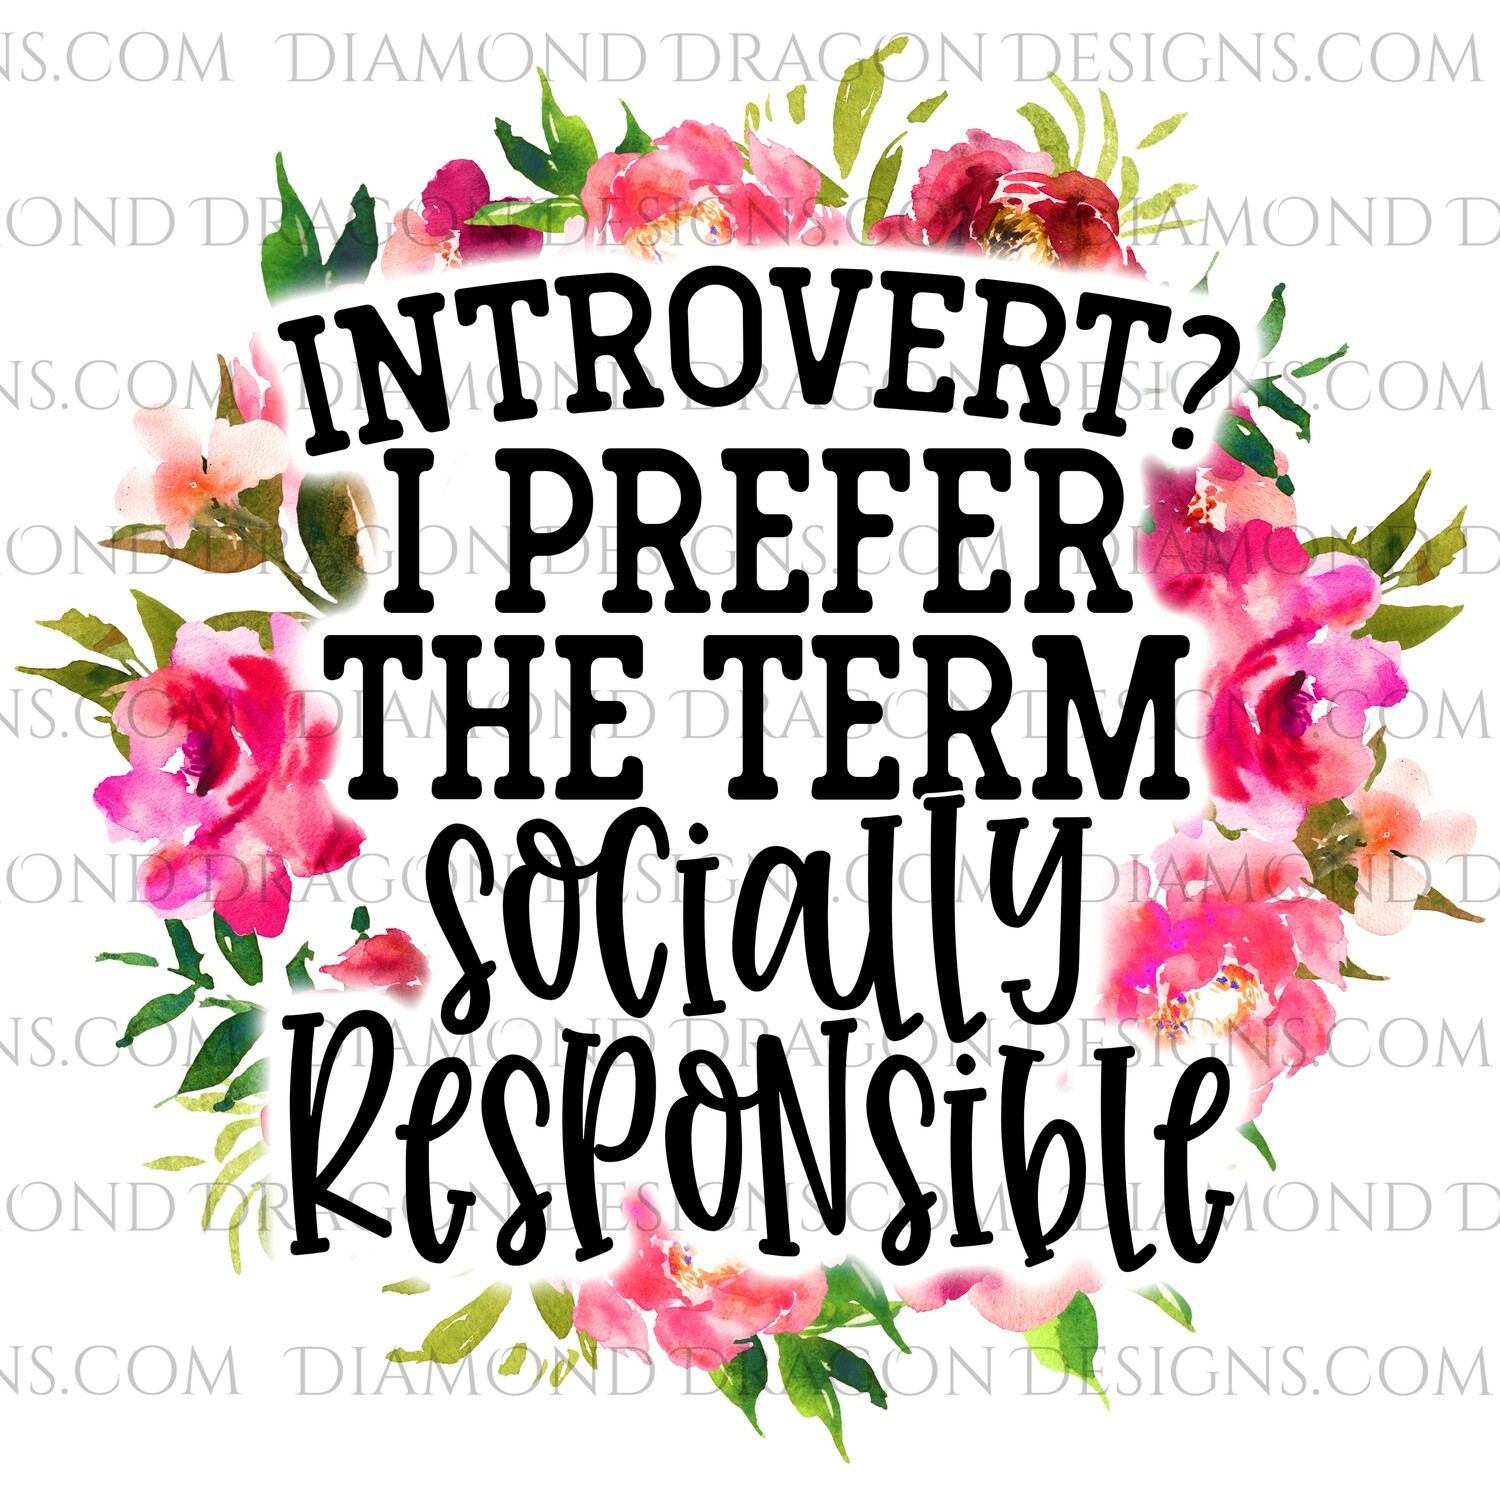 Quote -  Introvert, I prefer Socially Responsible, Funny, Waterslide